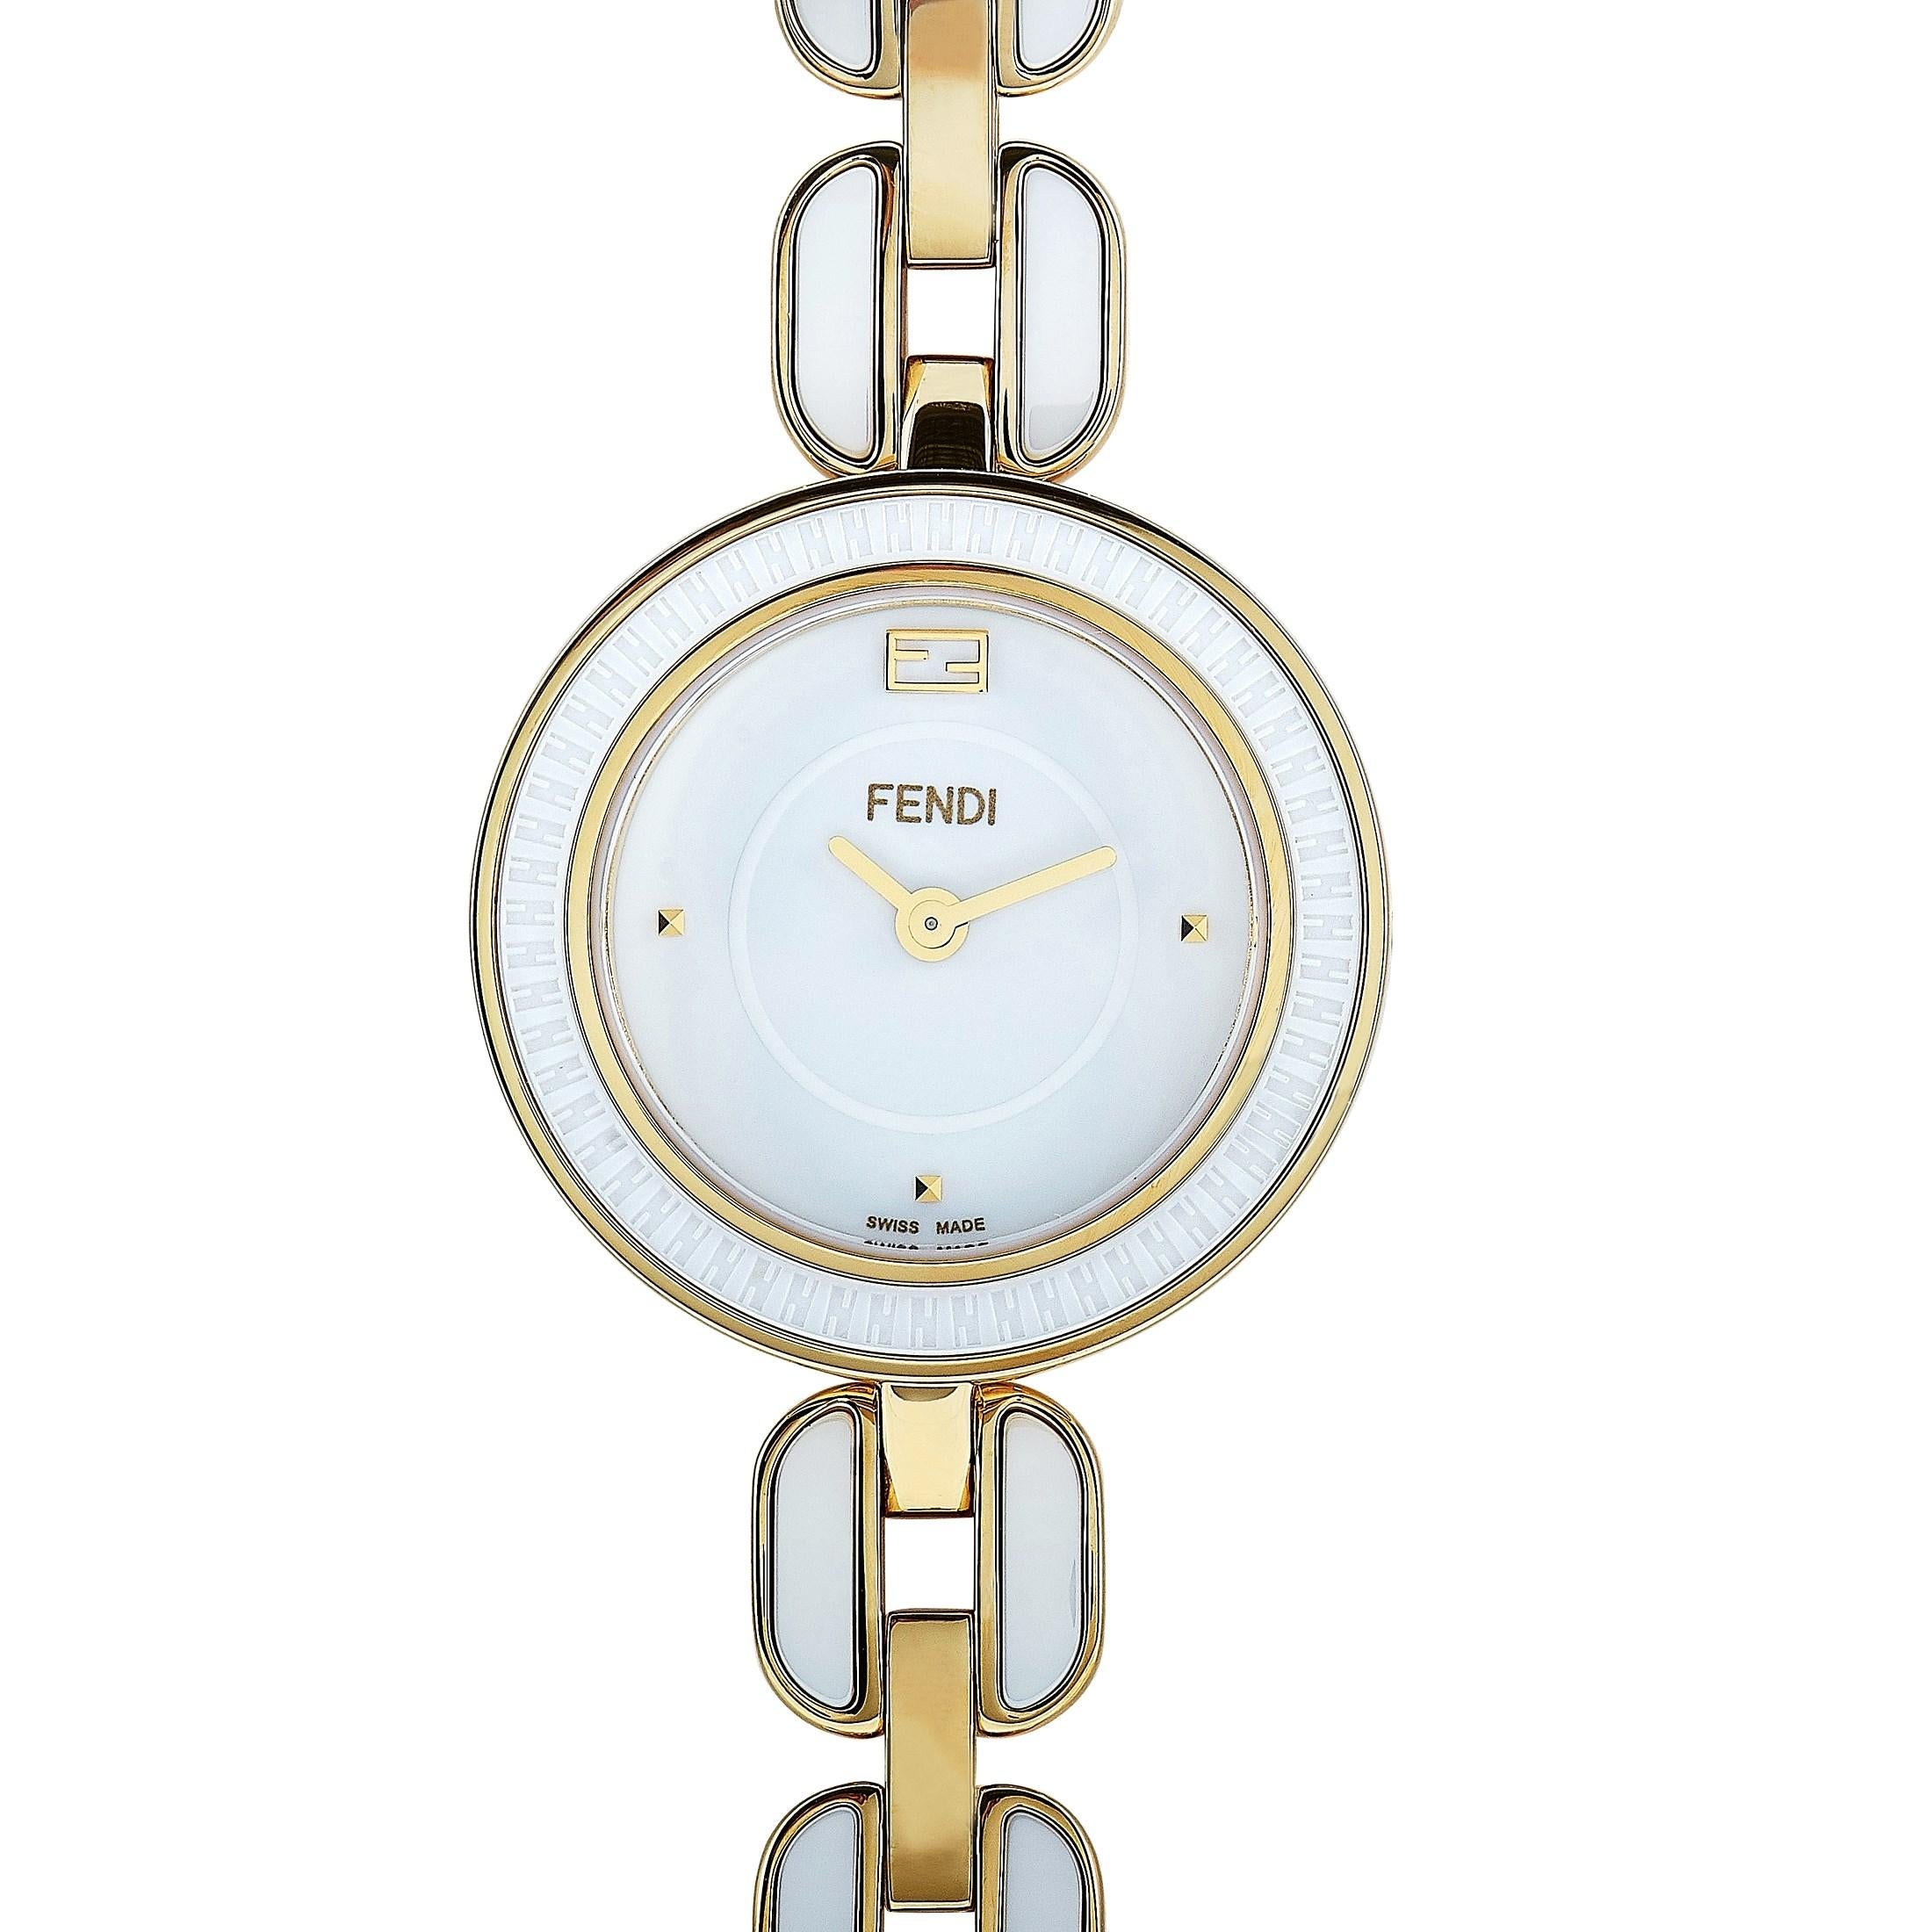 The Fendi My Way watch, reference number F359424004, boasts a 28 mm gold-tone stainless steel case fitted with a white ceramic bezel. The case is presented on a matching gold-tone stainless steel bracelet. This model is powered by a quartz movement